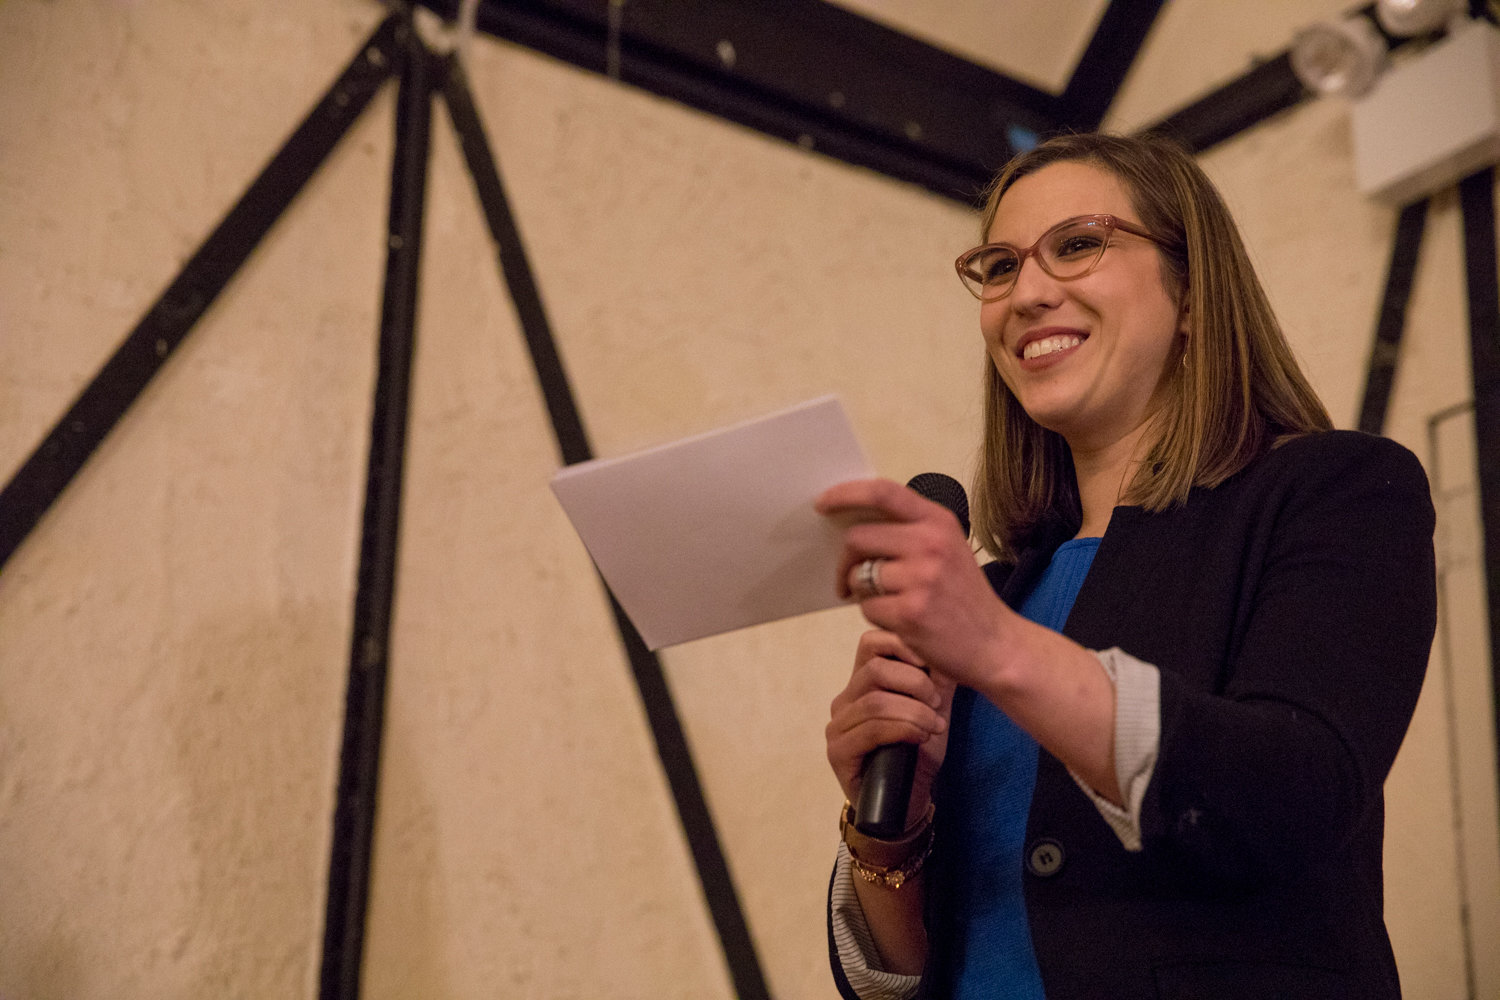 Morgan Evers, who tried earlier this year to become the new president of the Benjamin Franklin Reform Democratic Club, is starting a new group she says complements the existing club, not competes,